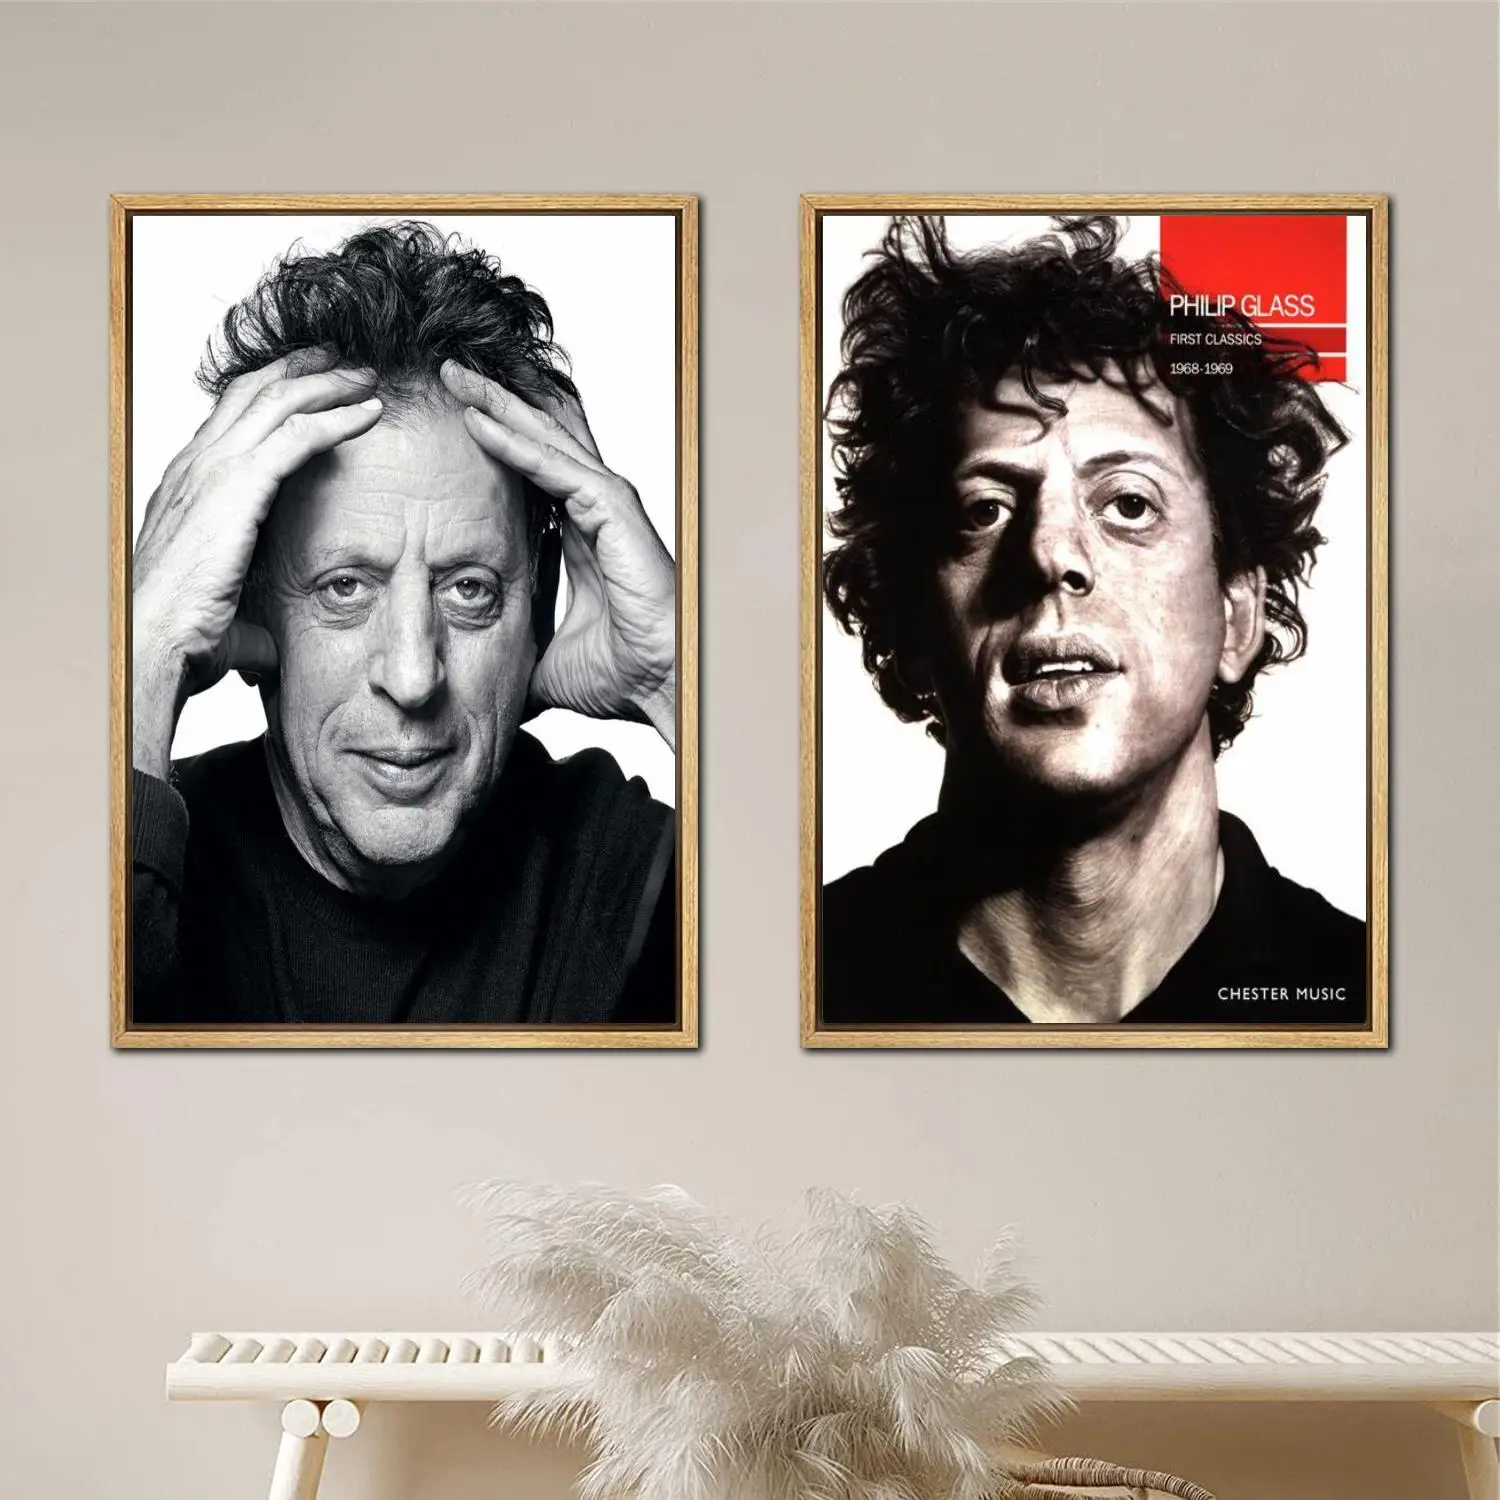 Philip Glass Poster Painting 24x36 Wall Art Canvas Posters room decor Modern Family bedroom Decoration Art wall decor